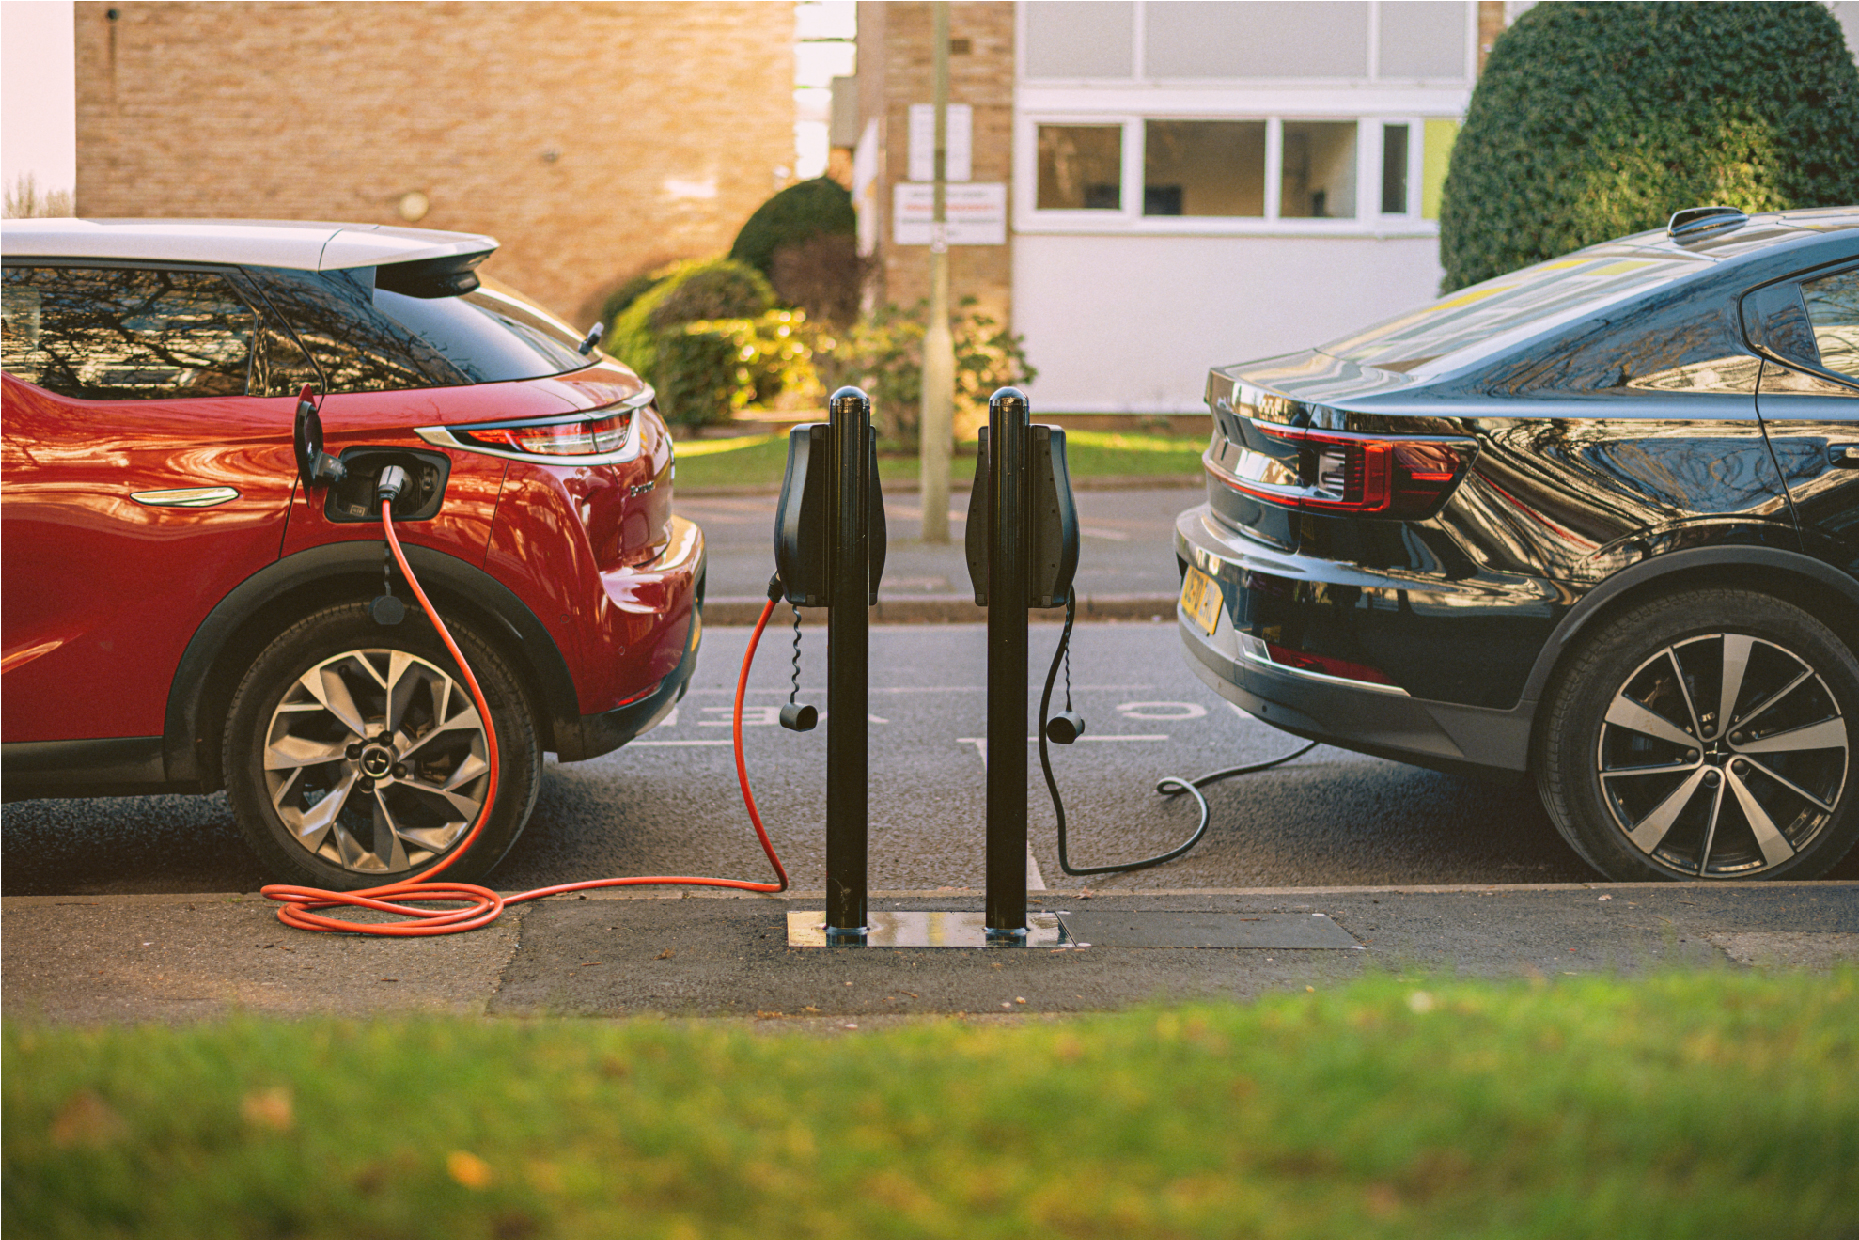 Image shows two cars, bumper to bumper charged into electric vehicle charging points